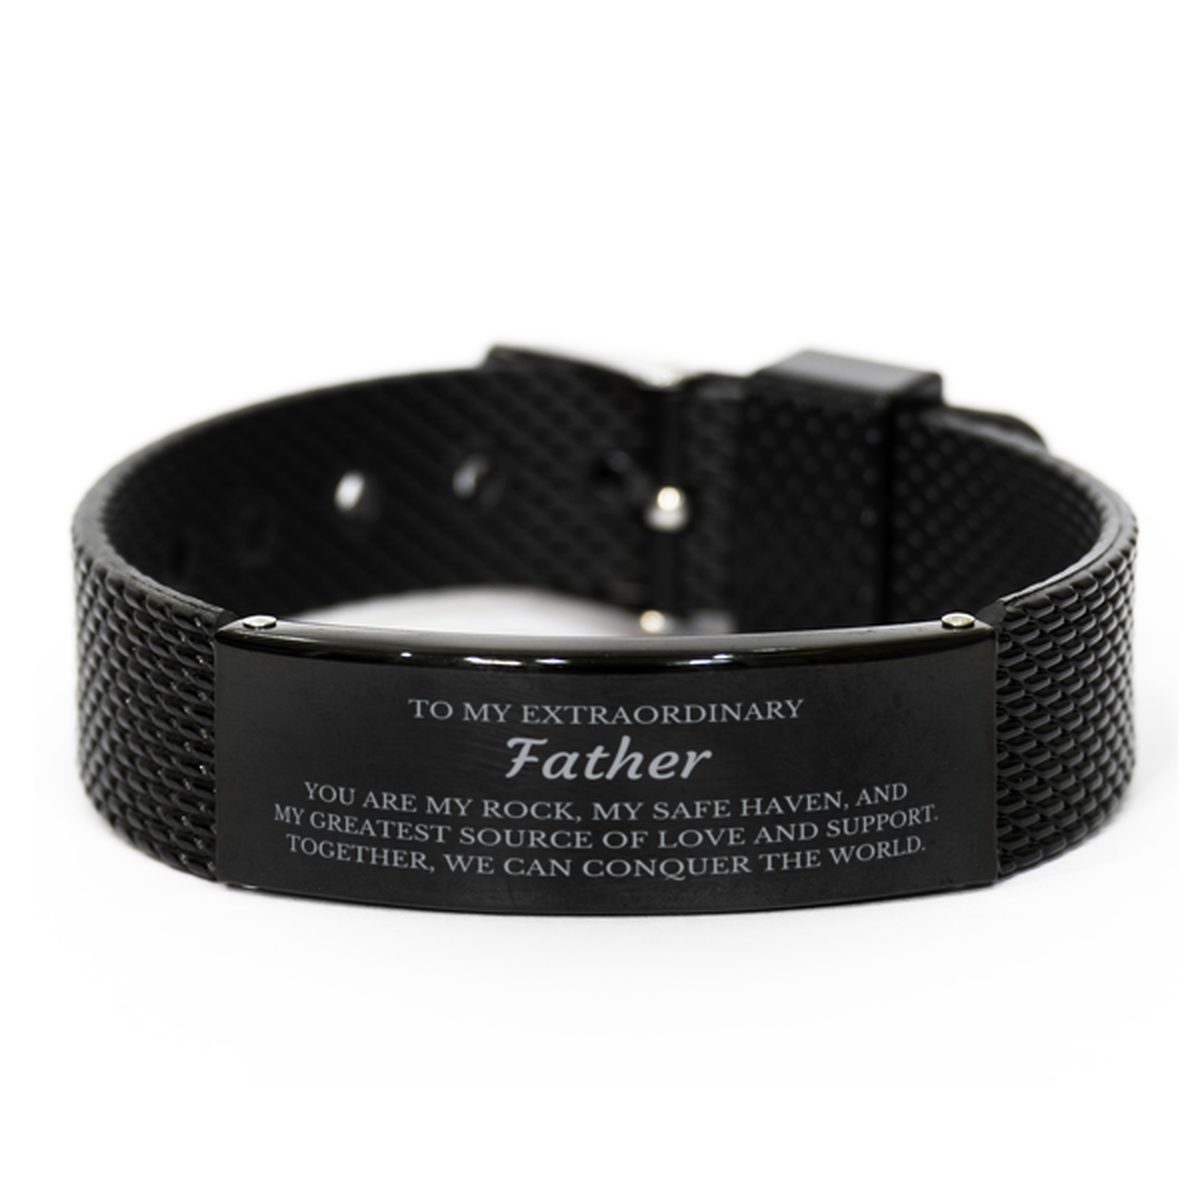 To My Extraordinary Father Gifts, Together, we can conquer the world, Birthday Black Shark Mesh Bracelet For Father, Christmas Gifts For Father